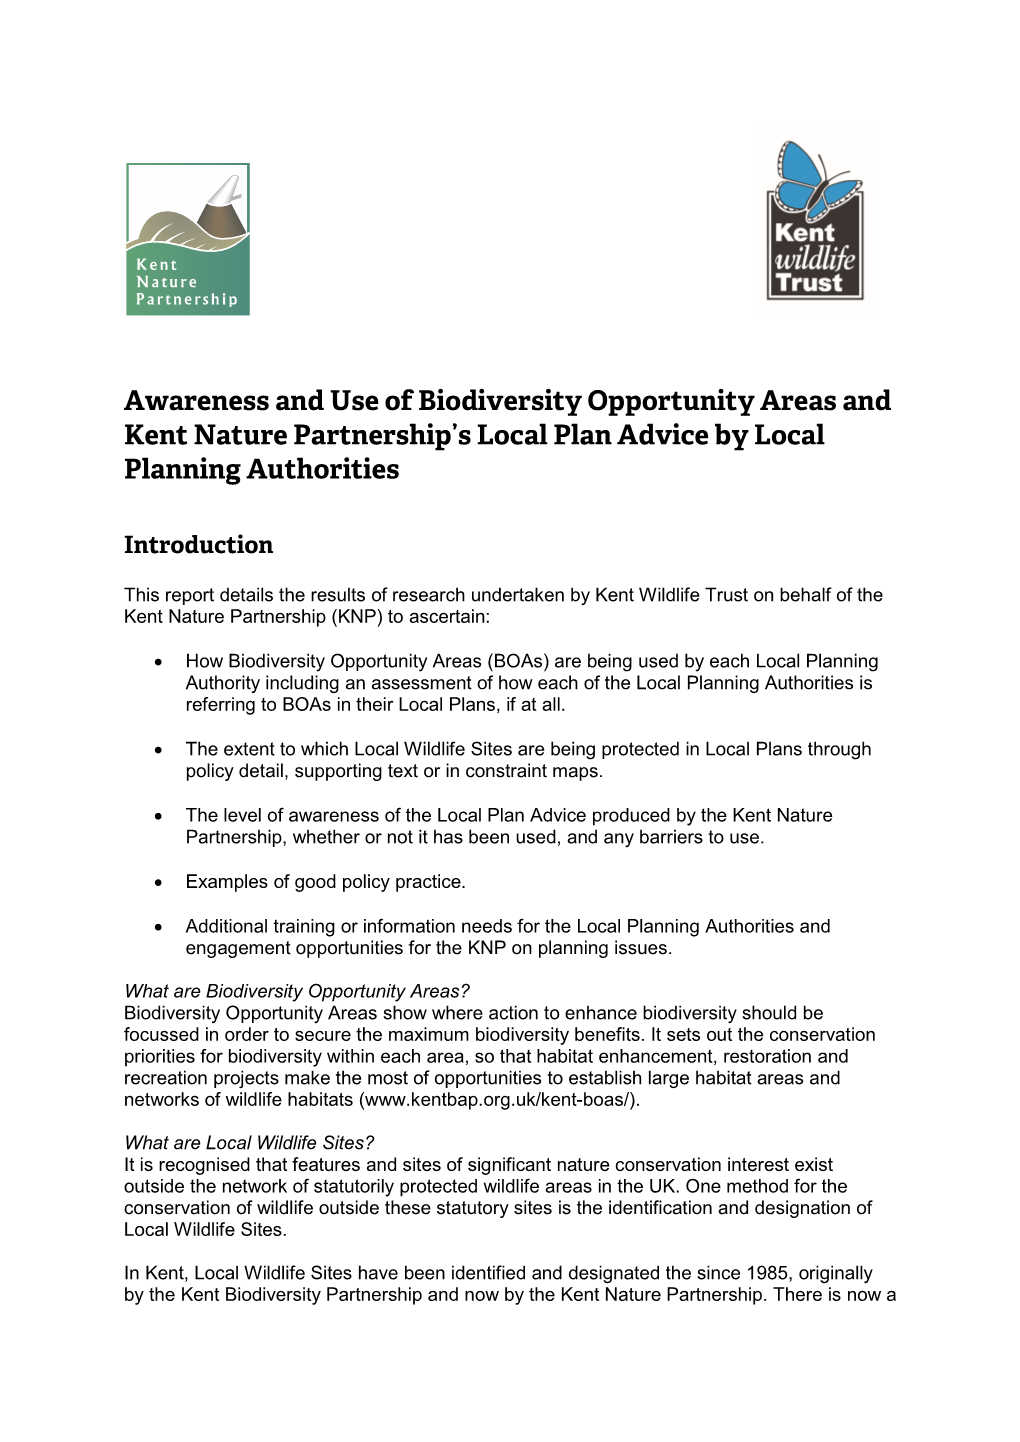 Awareness and Use of Biodiversity Opportunity Areas and Kent Nature Partnership’S Local Plan Advice by Local Planning Authorities